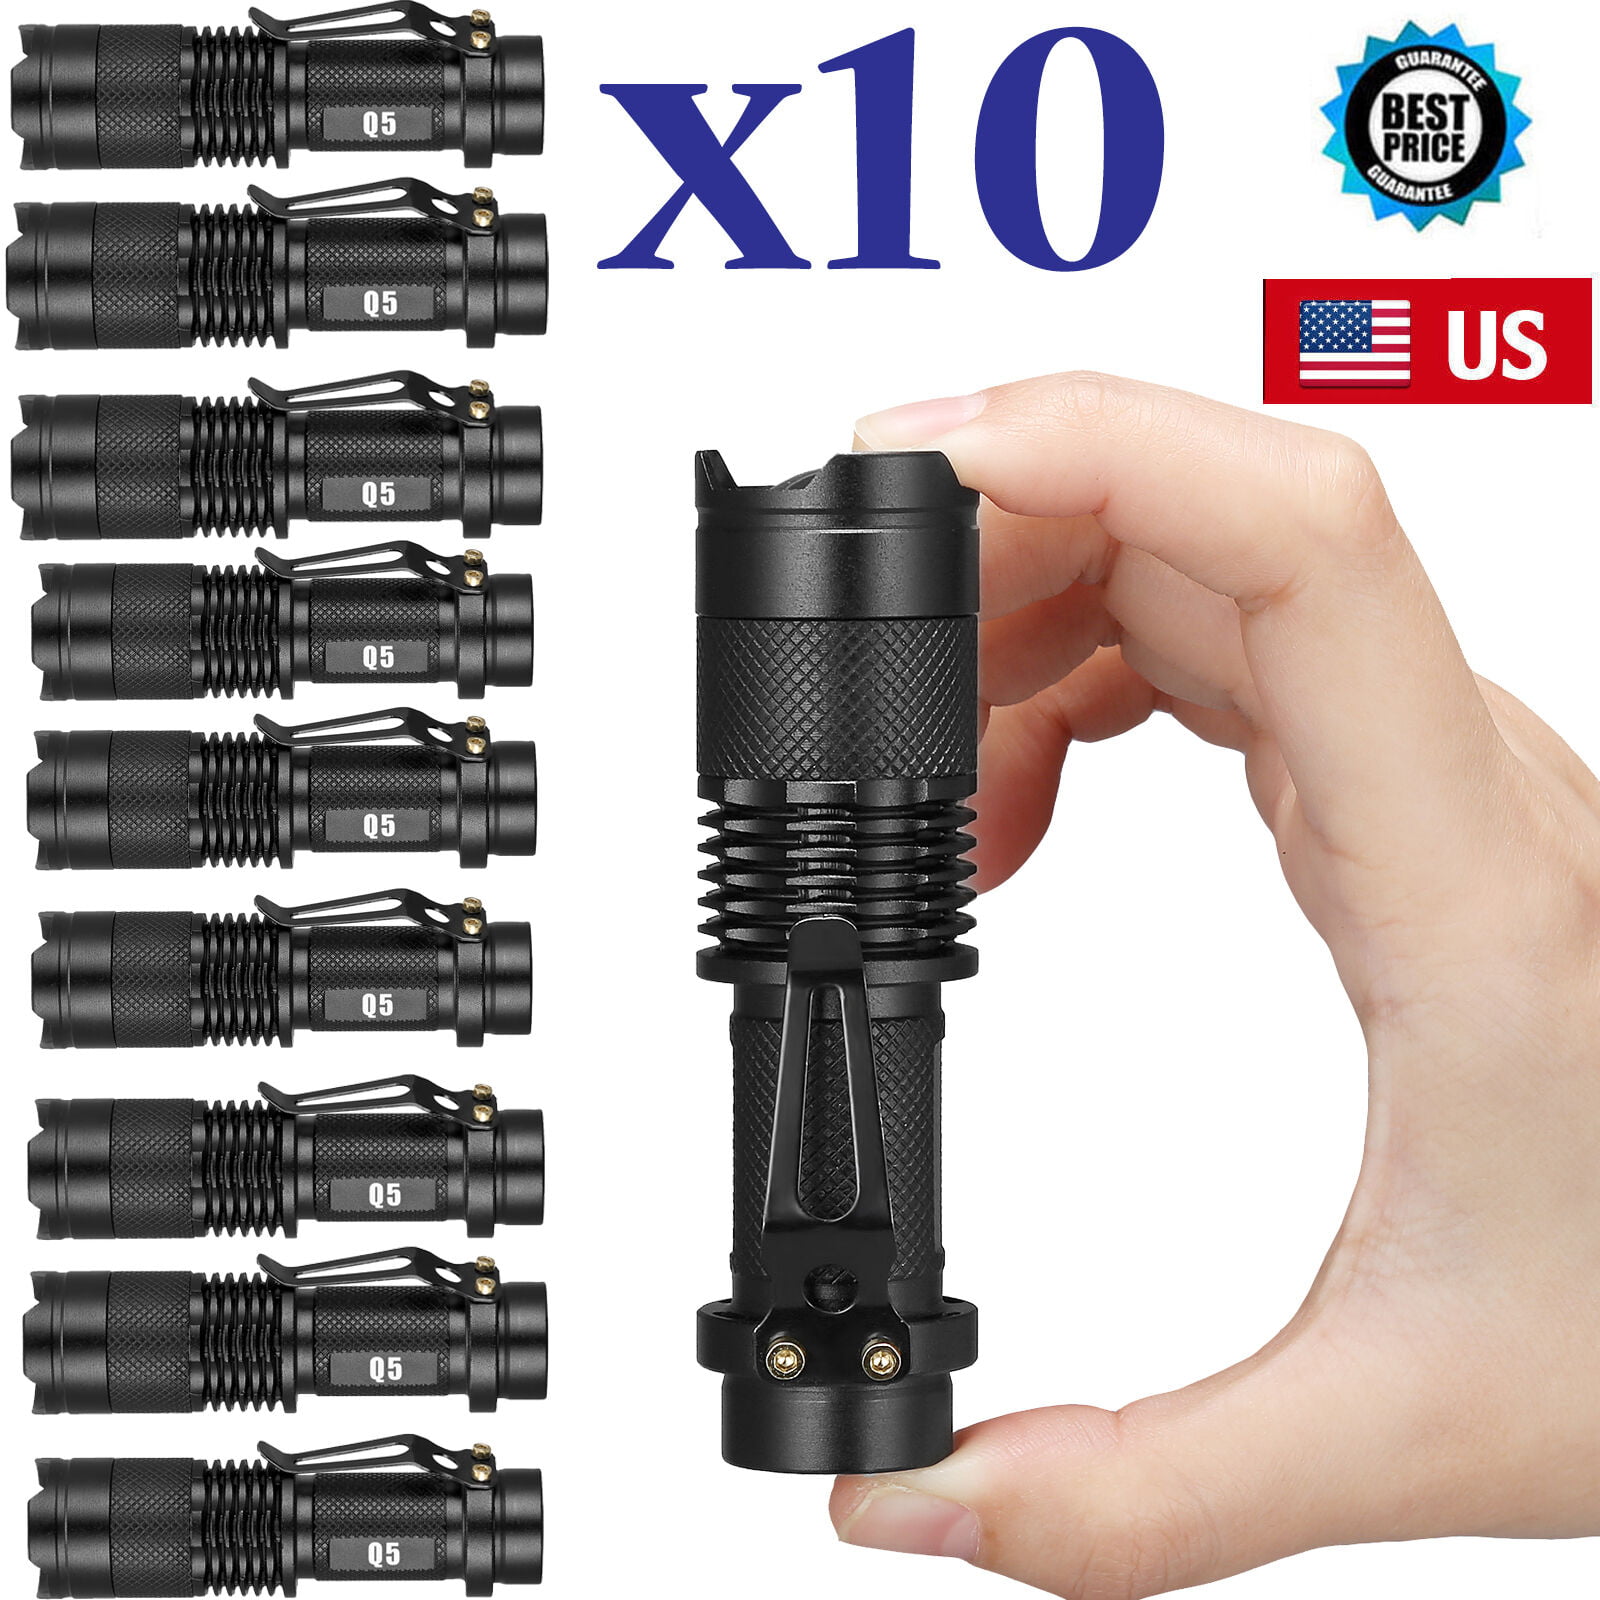 Ultrafire 10000LM Tactical Police Heavy Duty 18650 LED Rechargeable Flashlight 